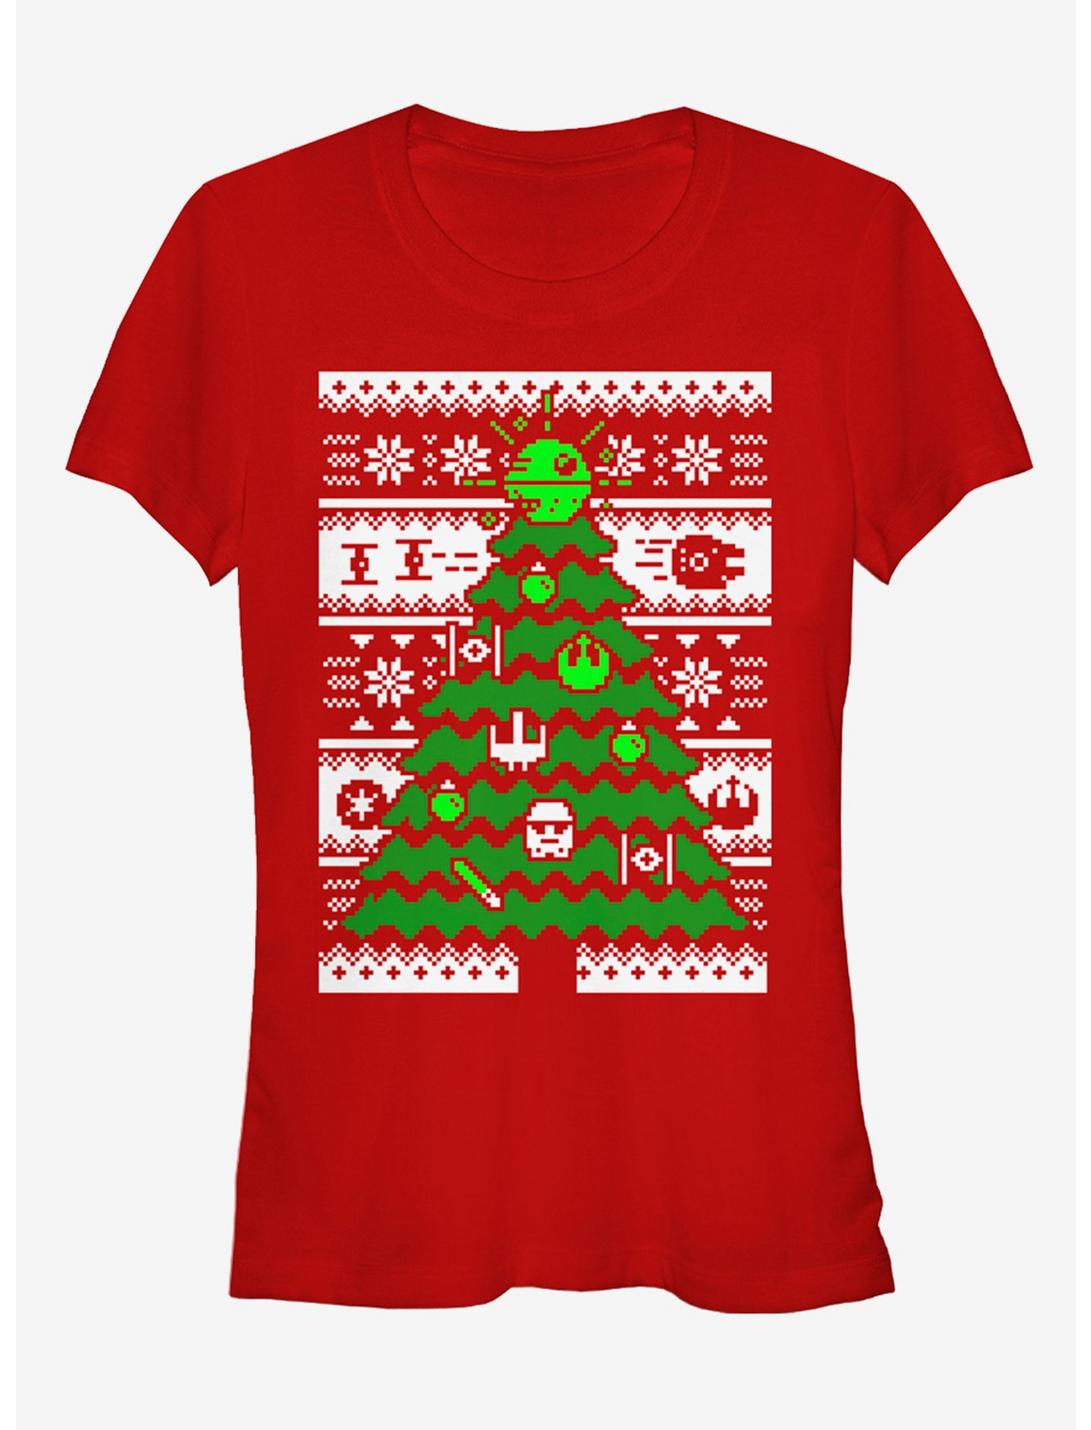 Star Wars Ugly Christmas Sweater Tree Girls T-Shirt, RED, hi-res